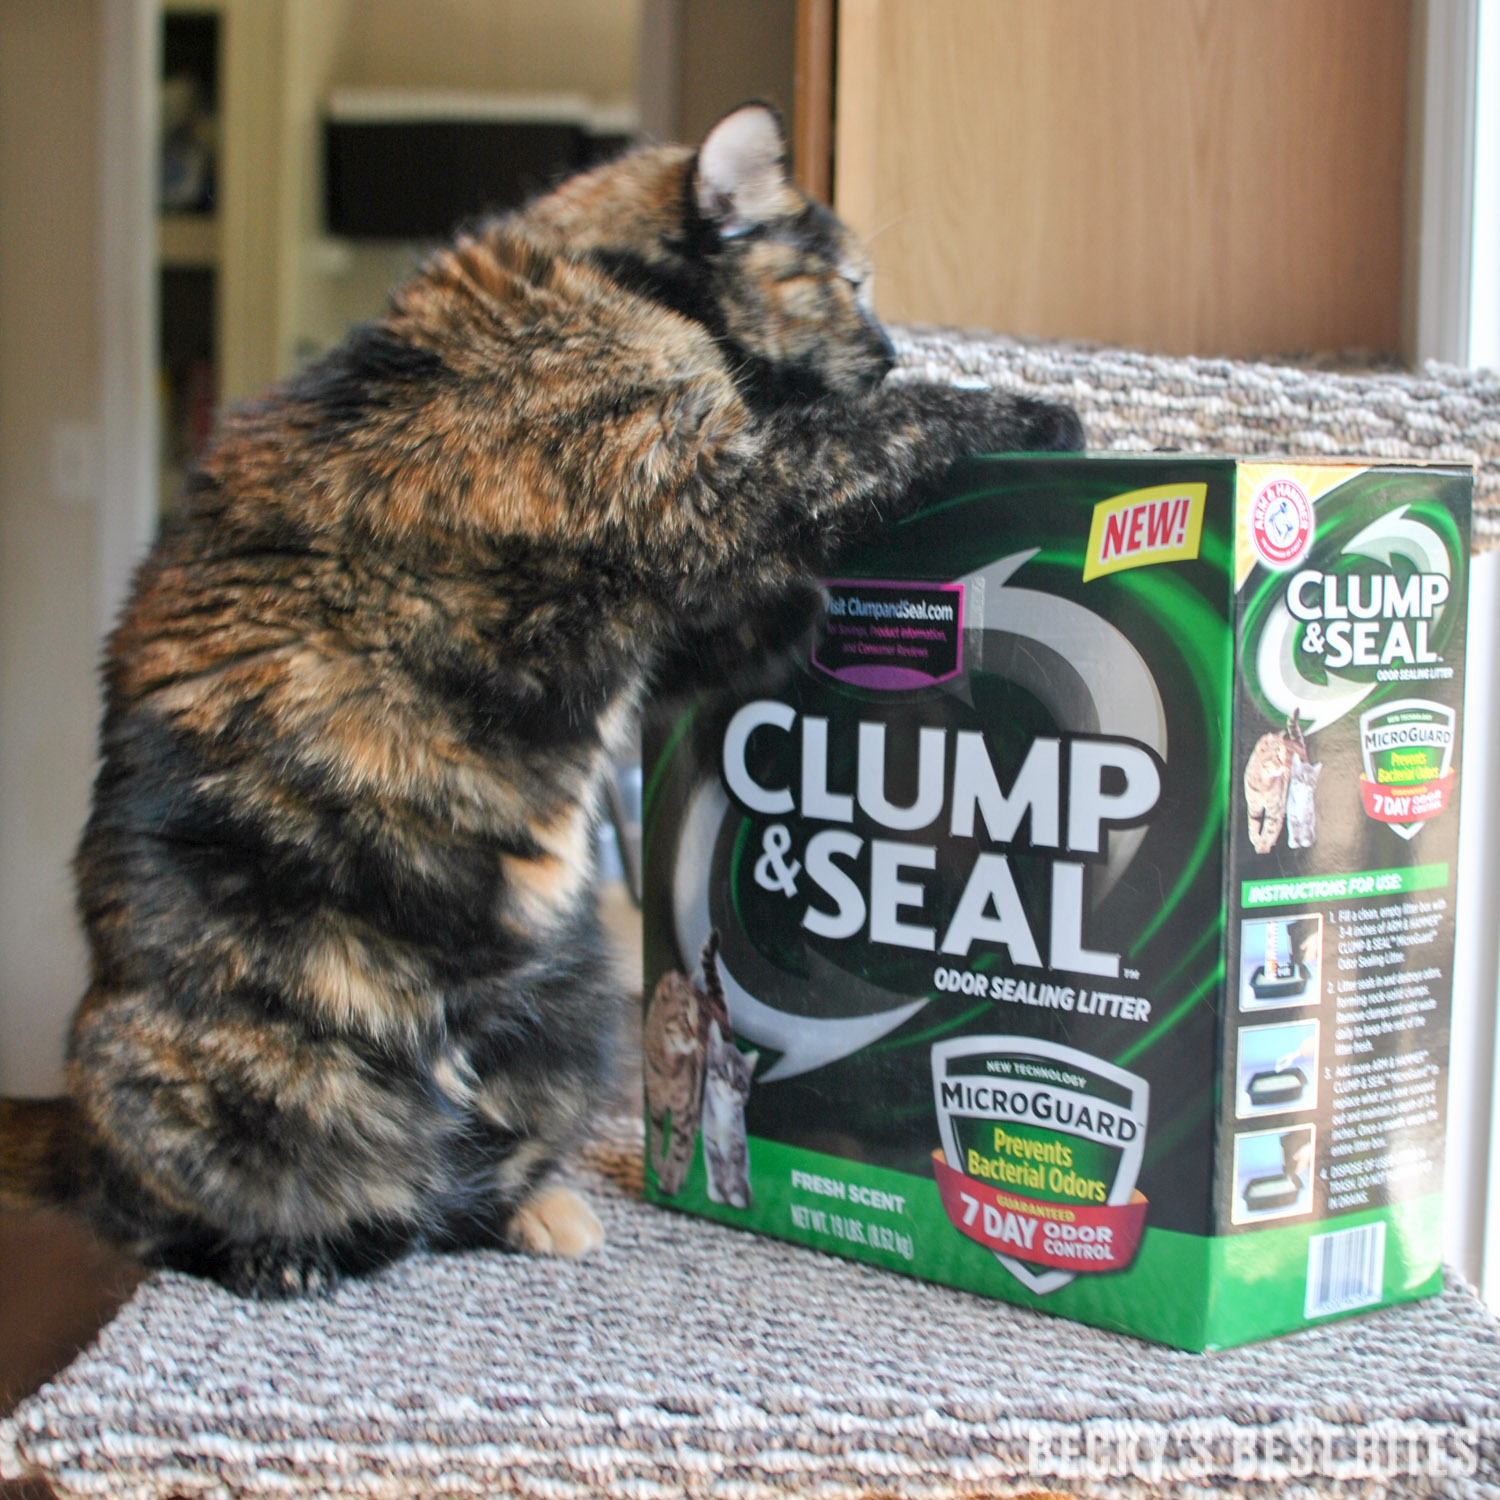 Get a Happier Home with ARM & HAMMER™ Clump & Seal™ MicroGuard™ Cat Litter! Experience the confidence of 7-day odor control—guaranteed thanks to the heavy-duty odor eliminators plus ARM & HAMMER™ Baking Soda that destroy immediate odors on contact. | beckysbestbites.com #clumpandseal #ad #sk